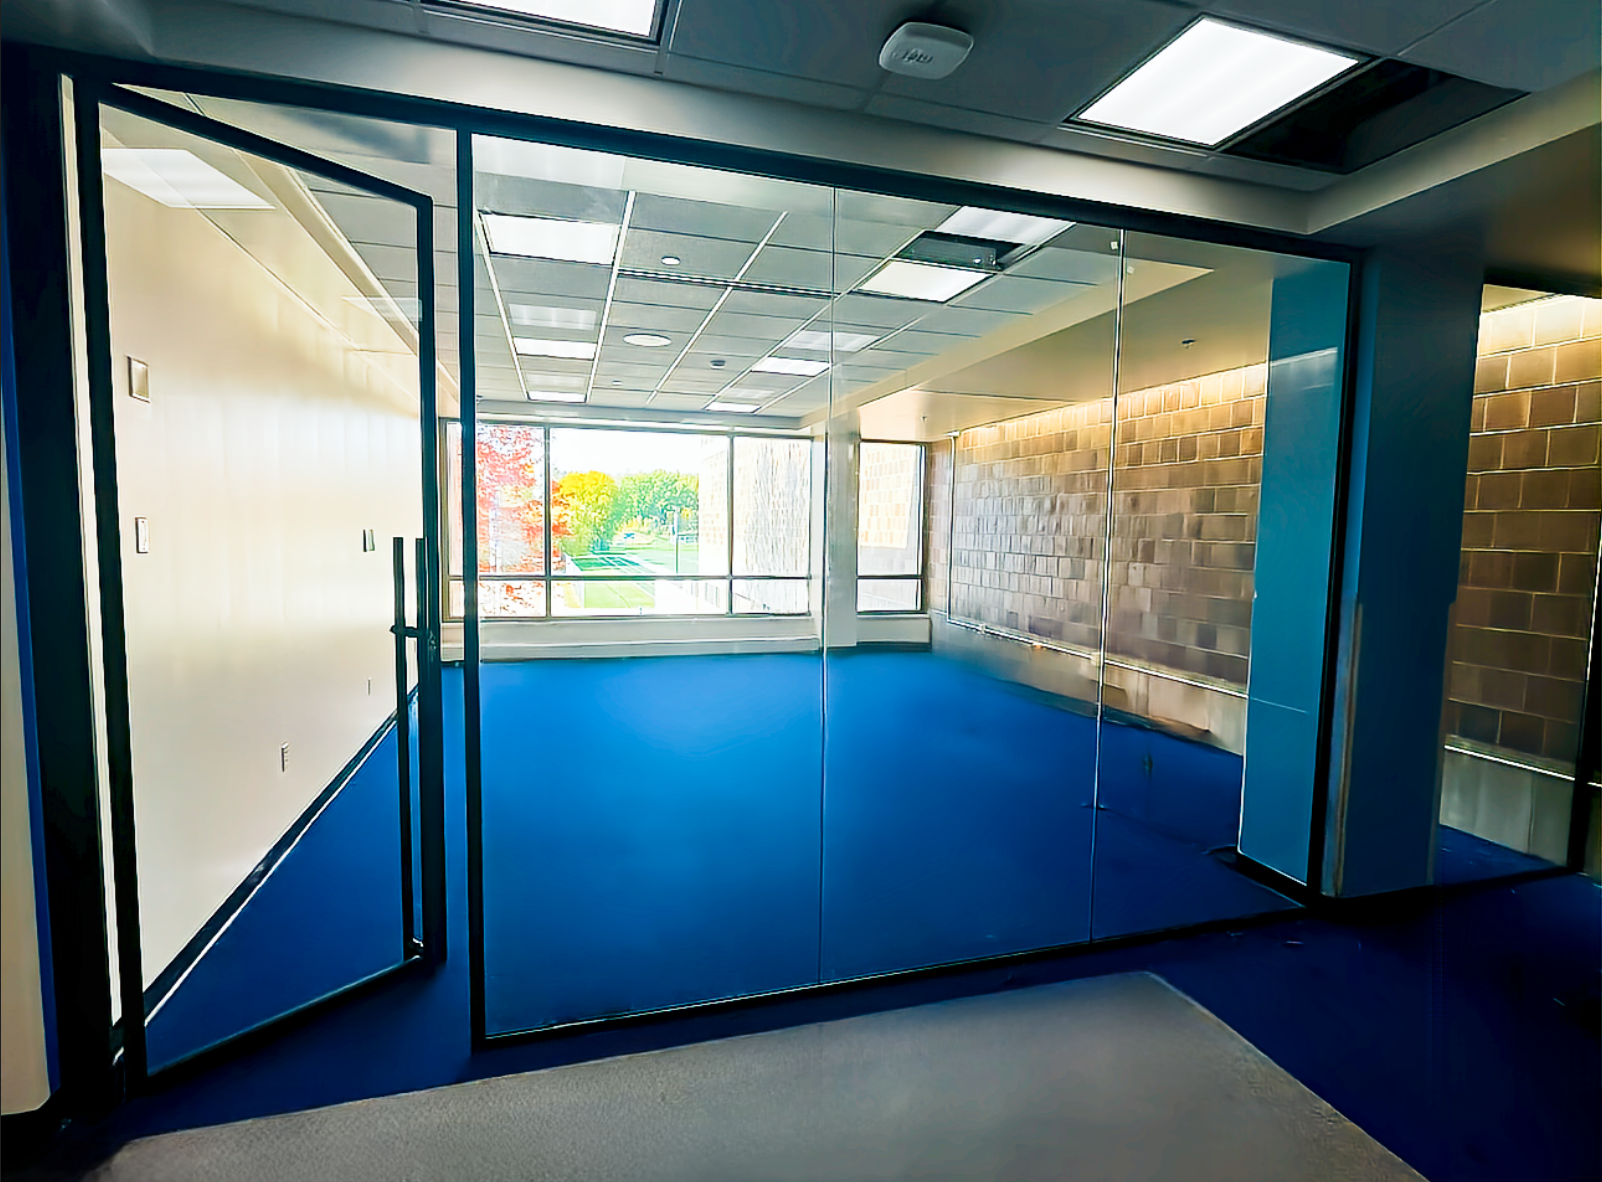 w l hall company Hopkins Senior High & West Junior High Schools Utilize ZONA & Modernfold Glass Walls for Collaborative, Safe and Flexible Learning Environments 6